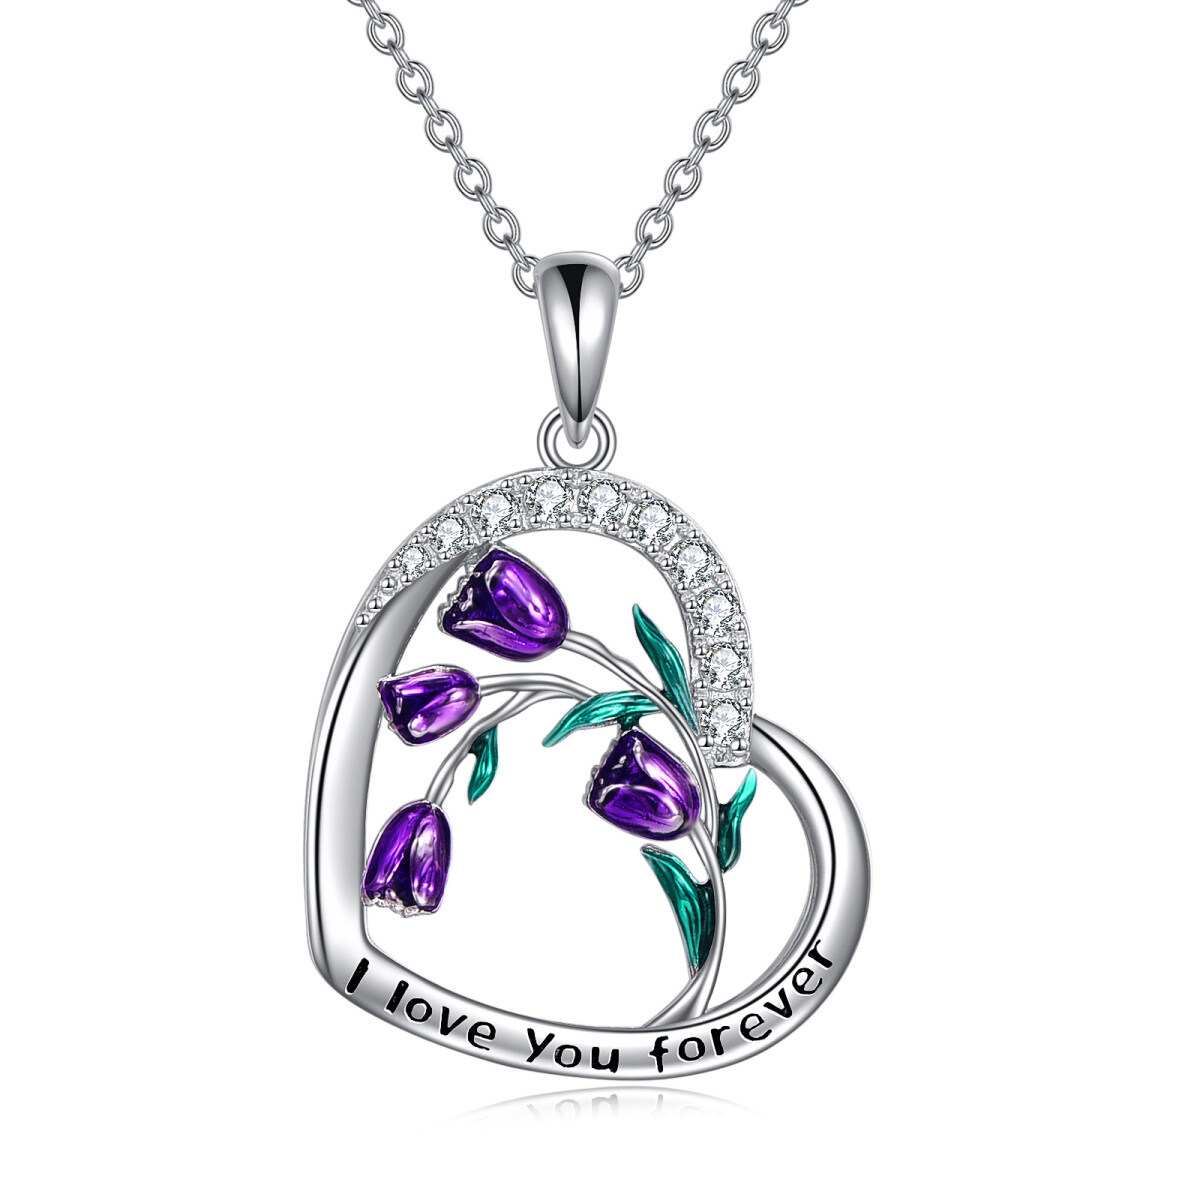 Sterling Silver Round Cubic Zirconia Tulip Pendant Necklace with Engraved Word-1